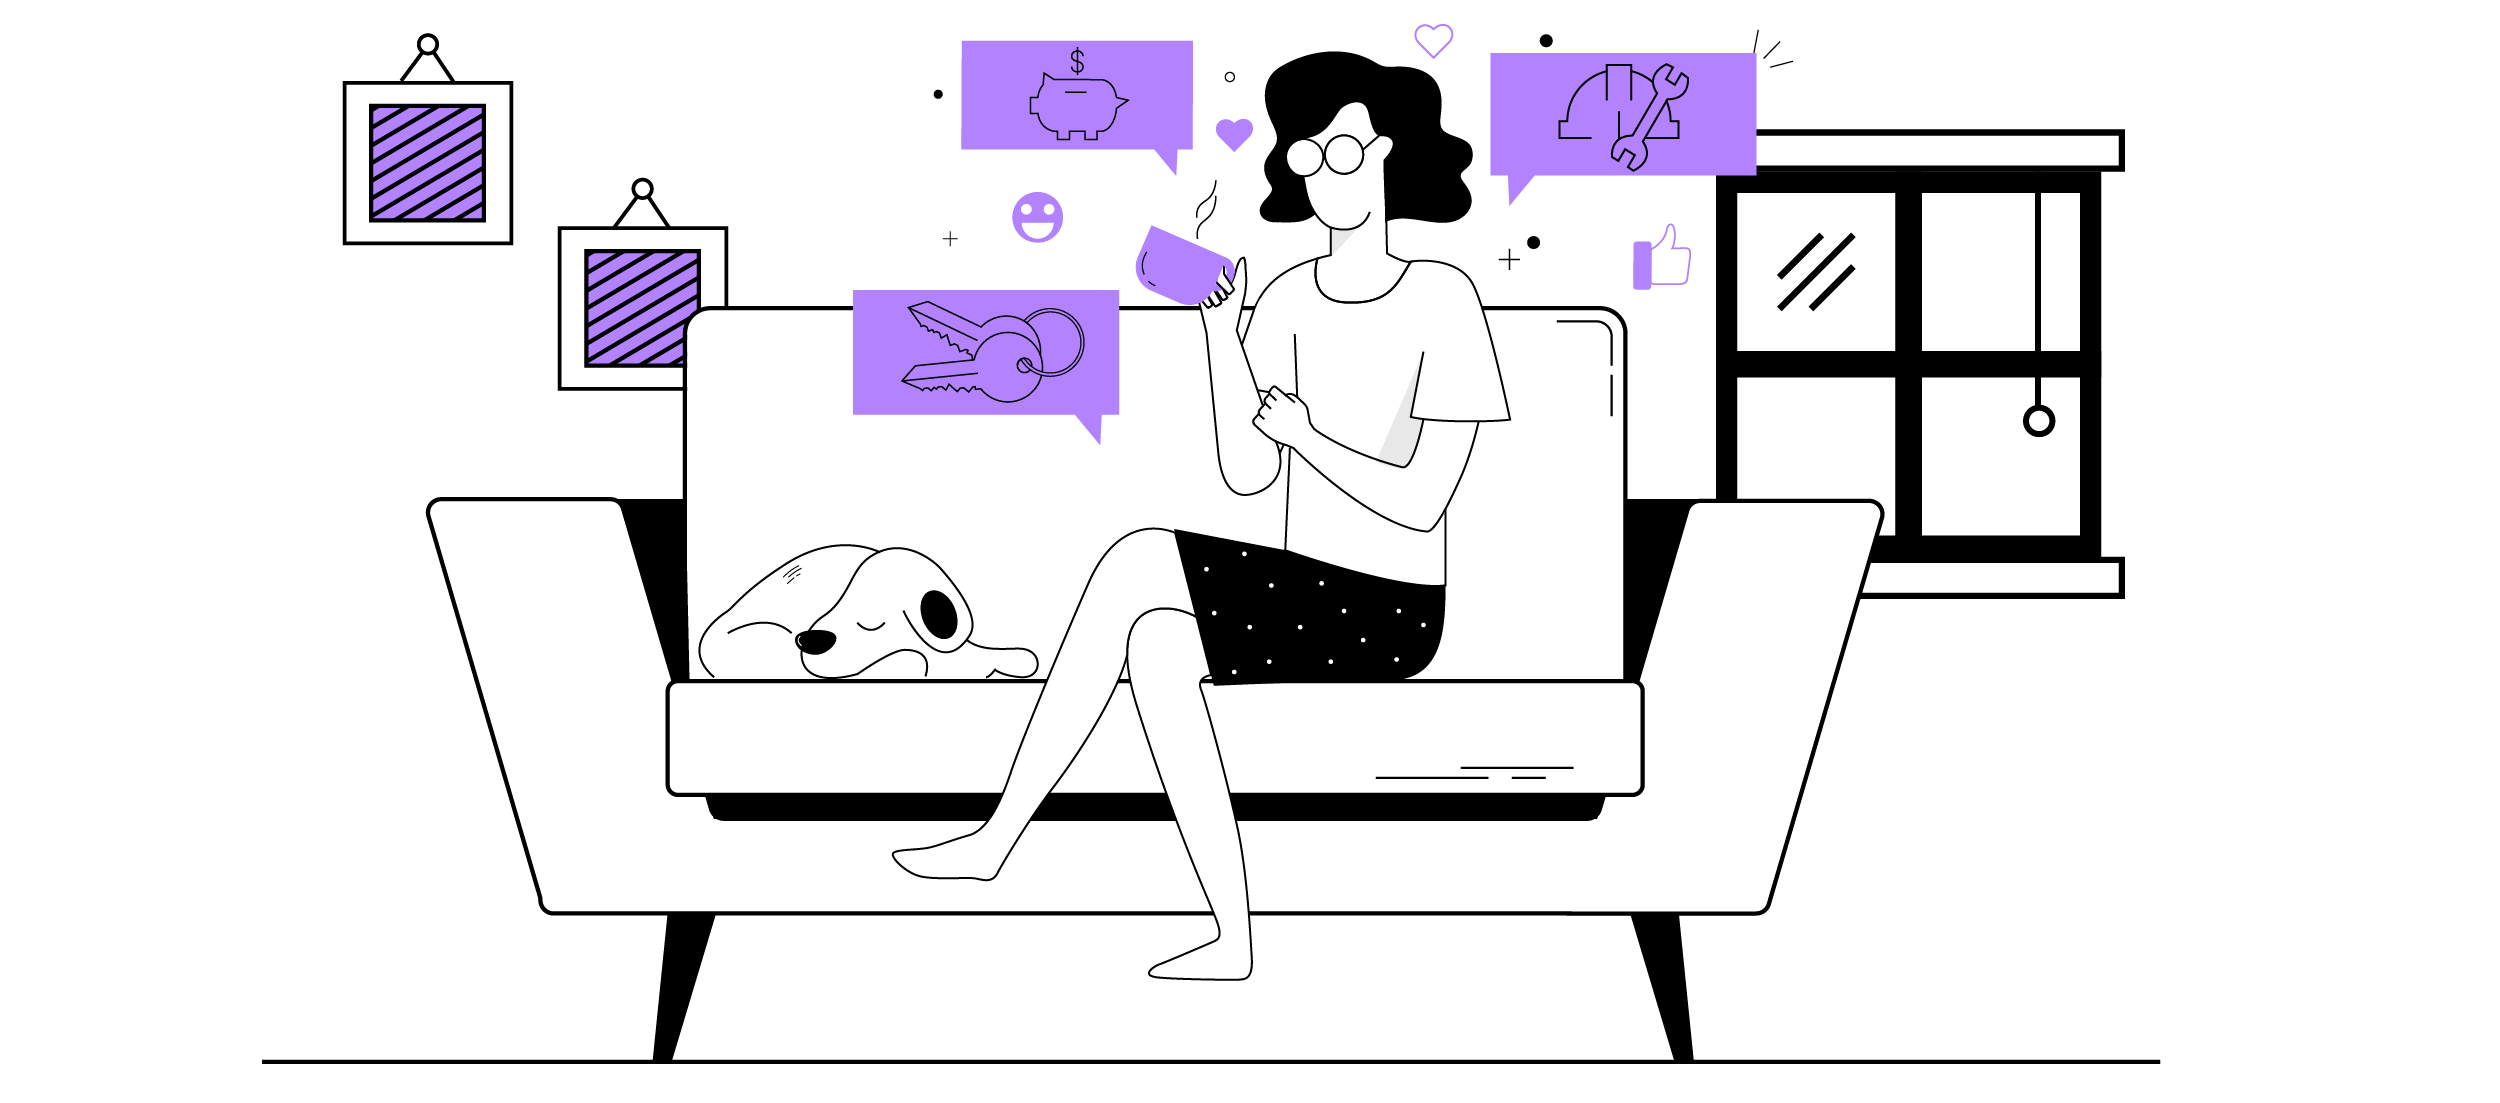 An illustration of a resident sitting on her couch in her apartment.